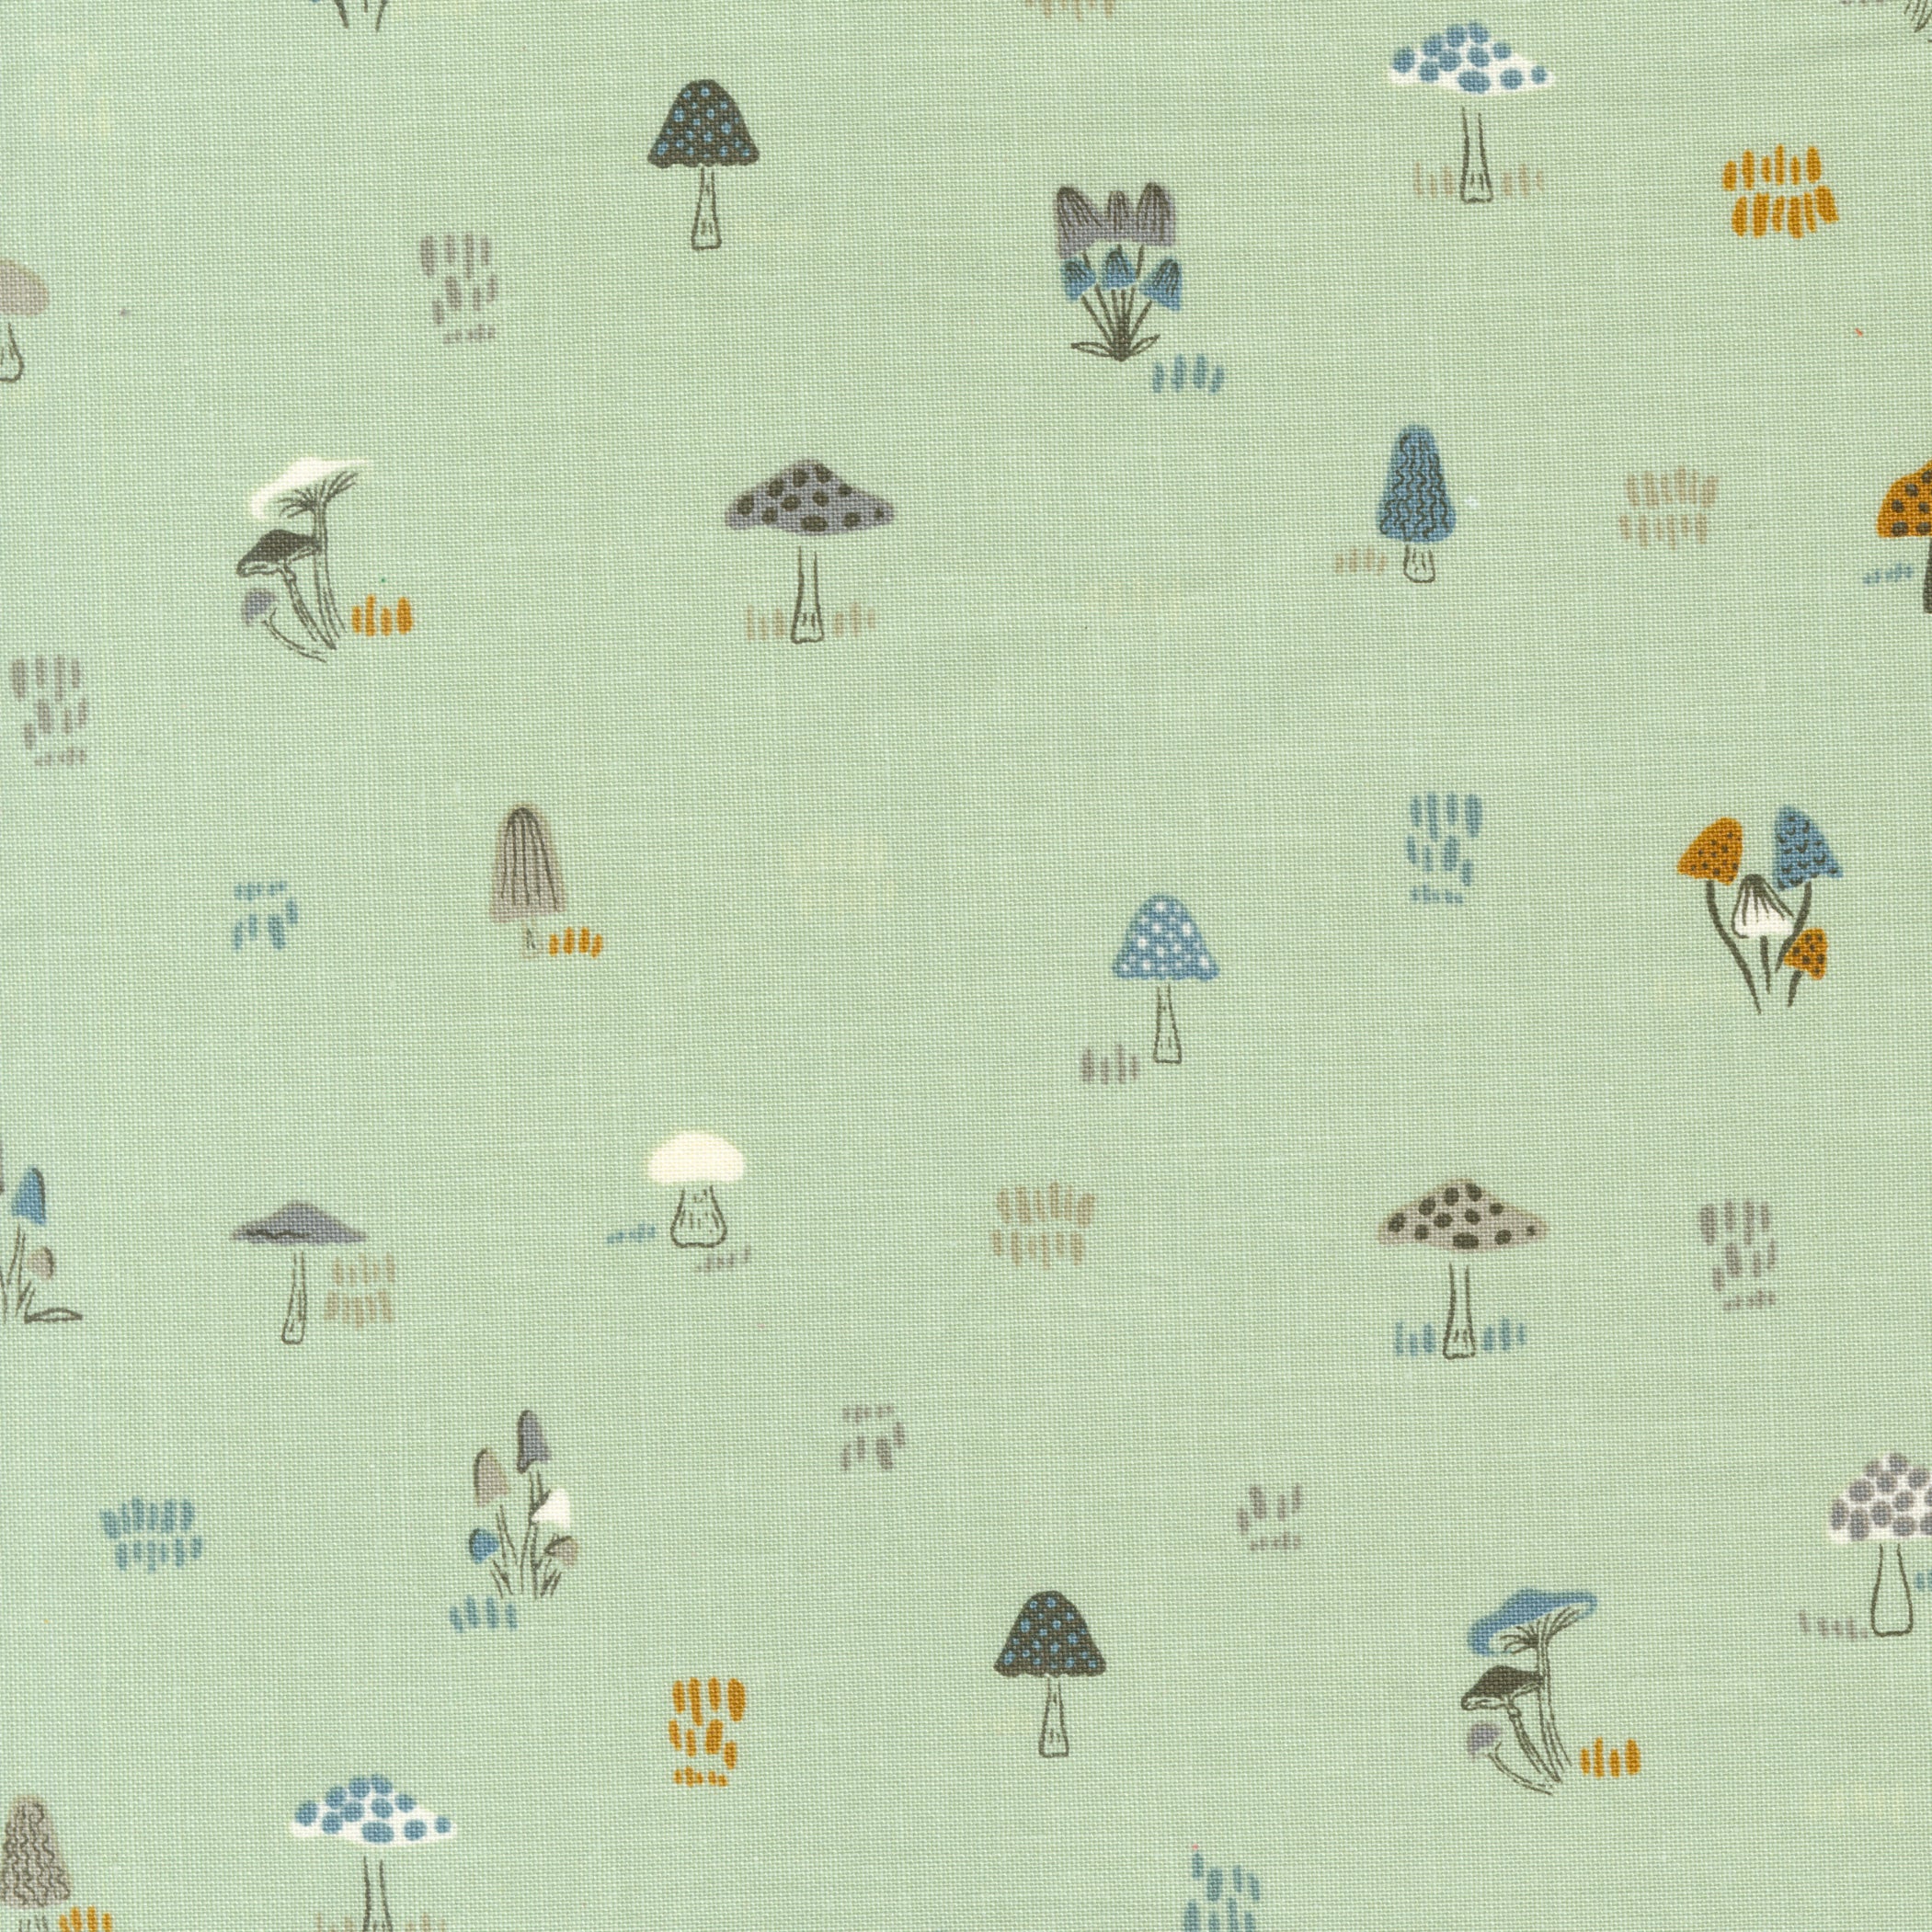 Woodland and Wildflowers Quilt Fabric - Micro Mushrooms in Pale Mint Green - 45585 20